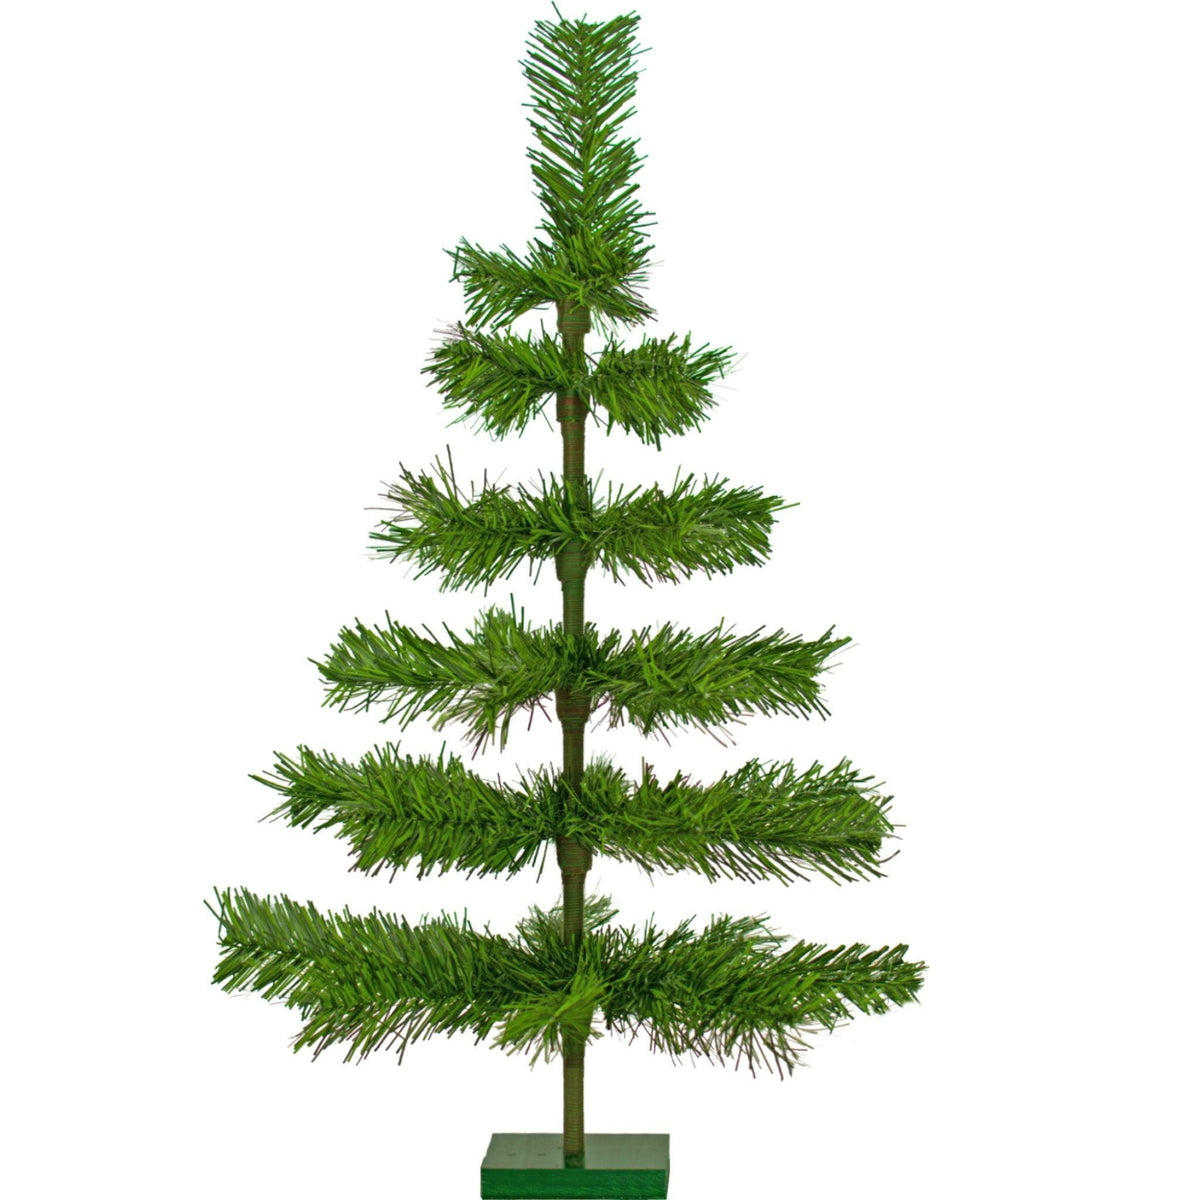 24in Tall Alpine Green Tinsel Christmas Trees made and sold in the US by Lee Display.  Shop now for your holiday decorations!